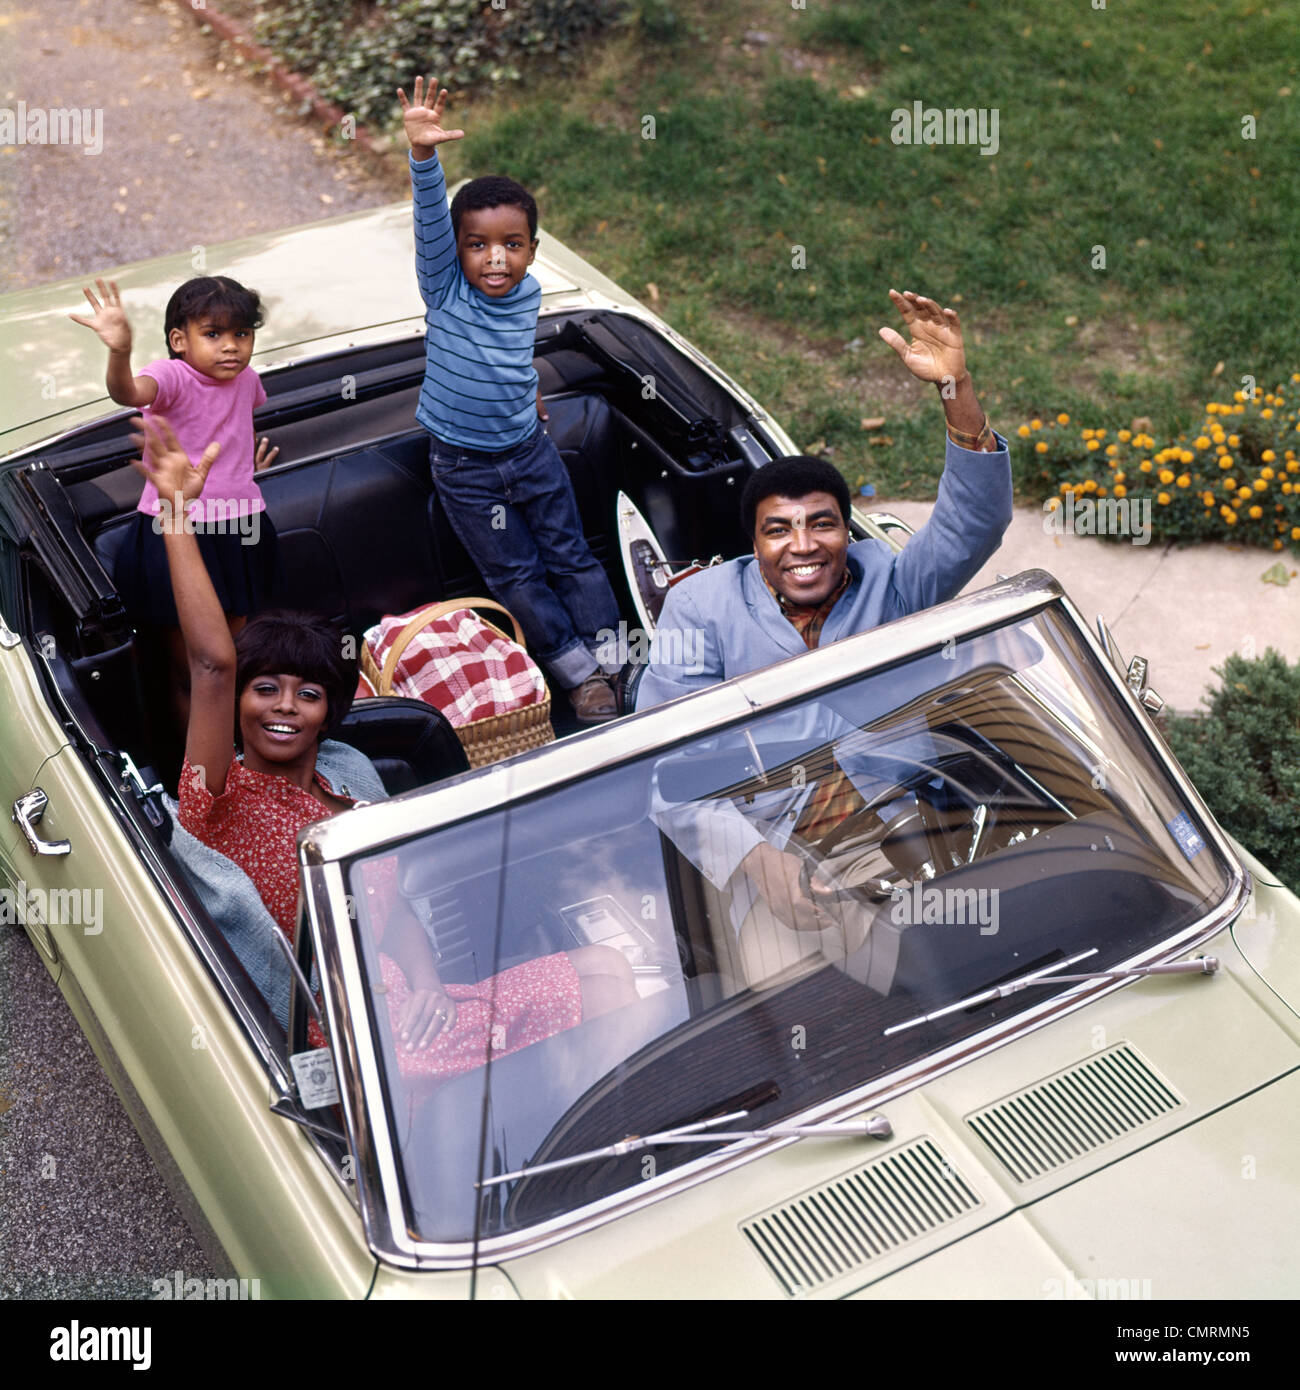 AFRICAN-AMERICAN FAMILY FATHER MOTHER SON DAUGHTER WAVING FROM CONVERTIBLE CAR OUTDOOR 1970s Stock Photo